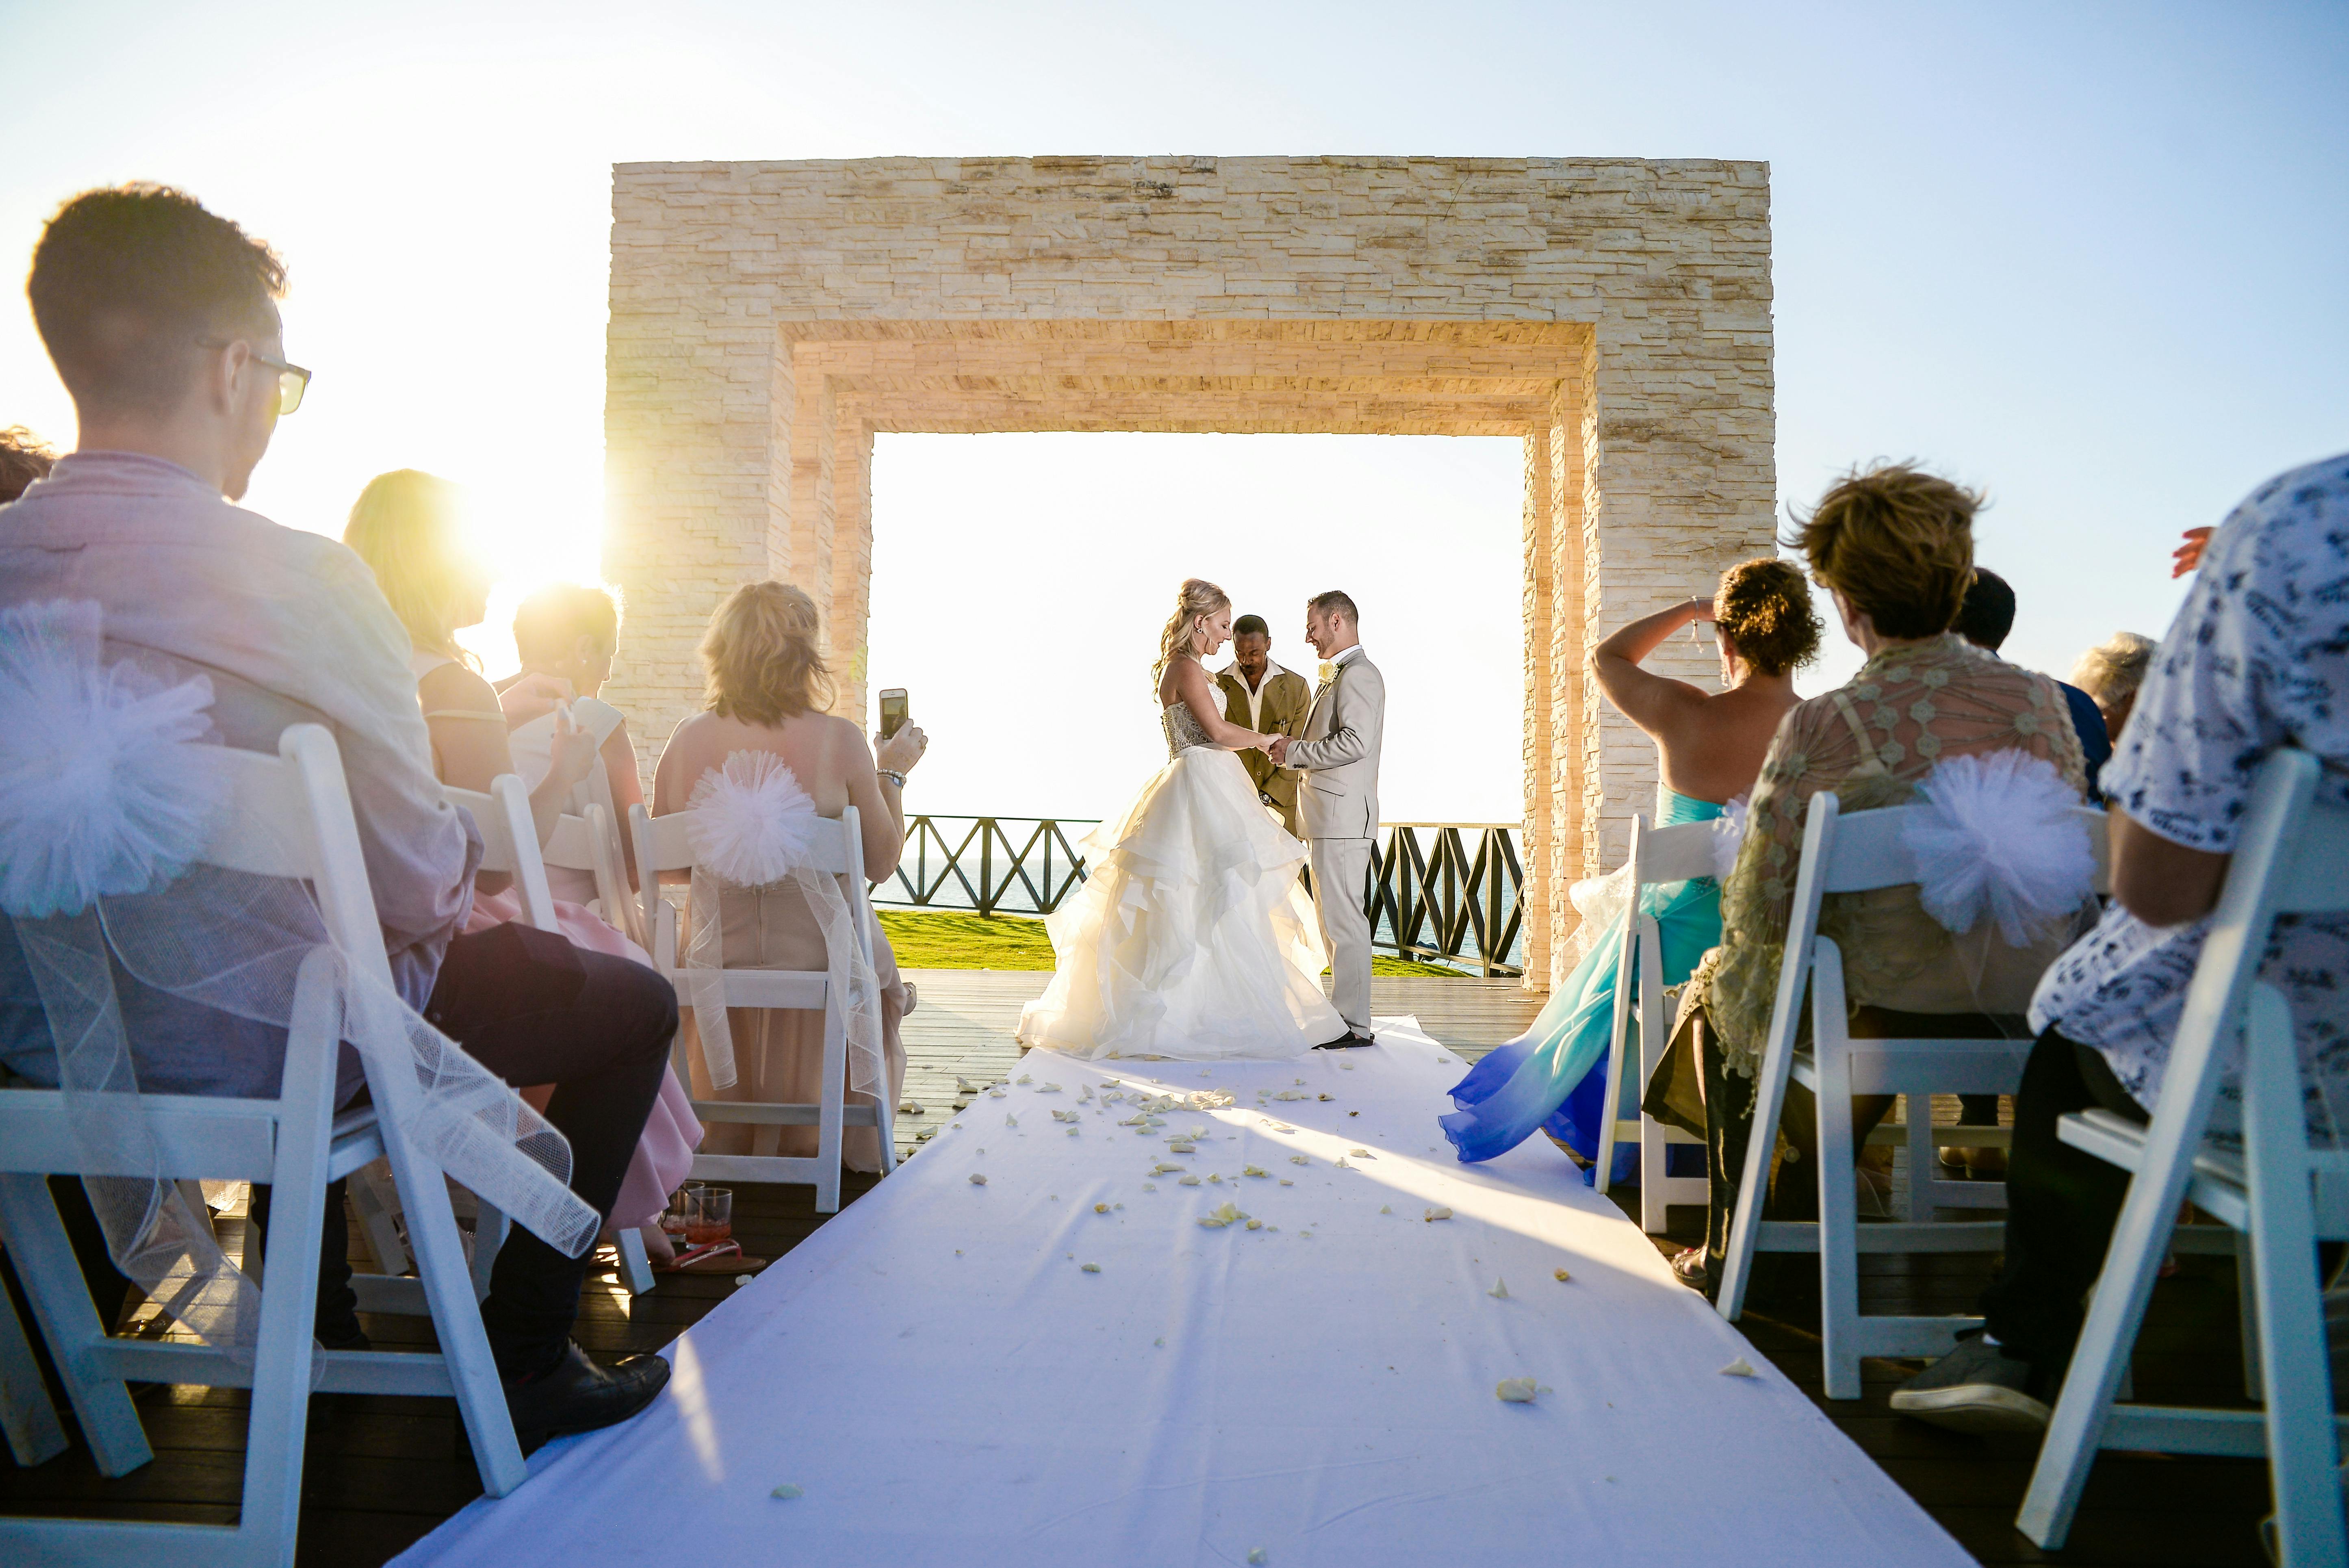 Event Photography: Capturing Moments that Matter